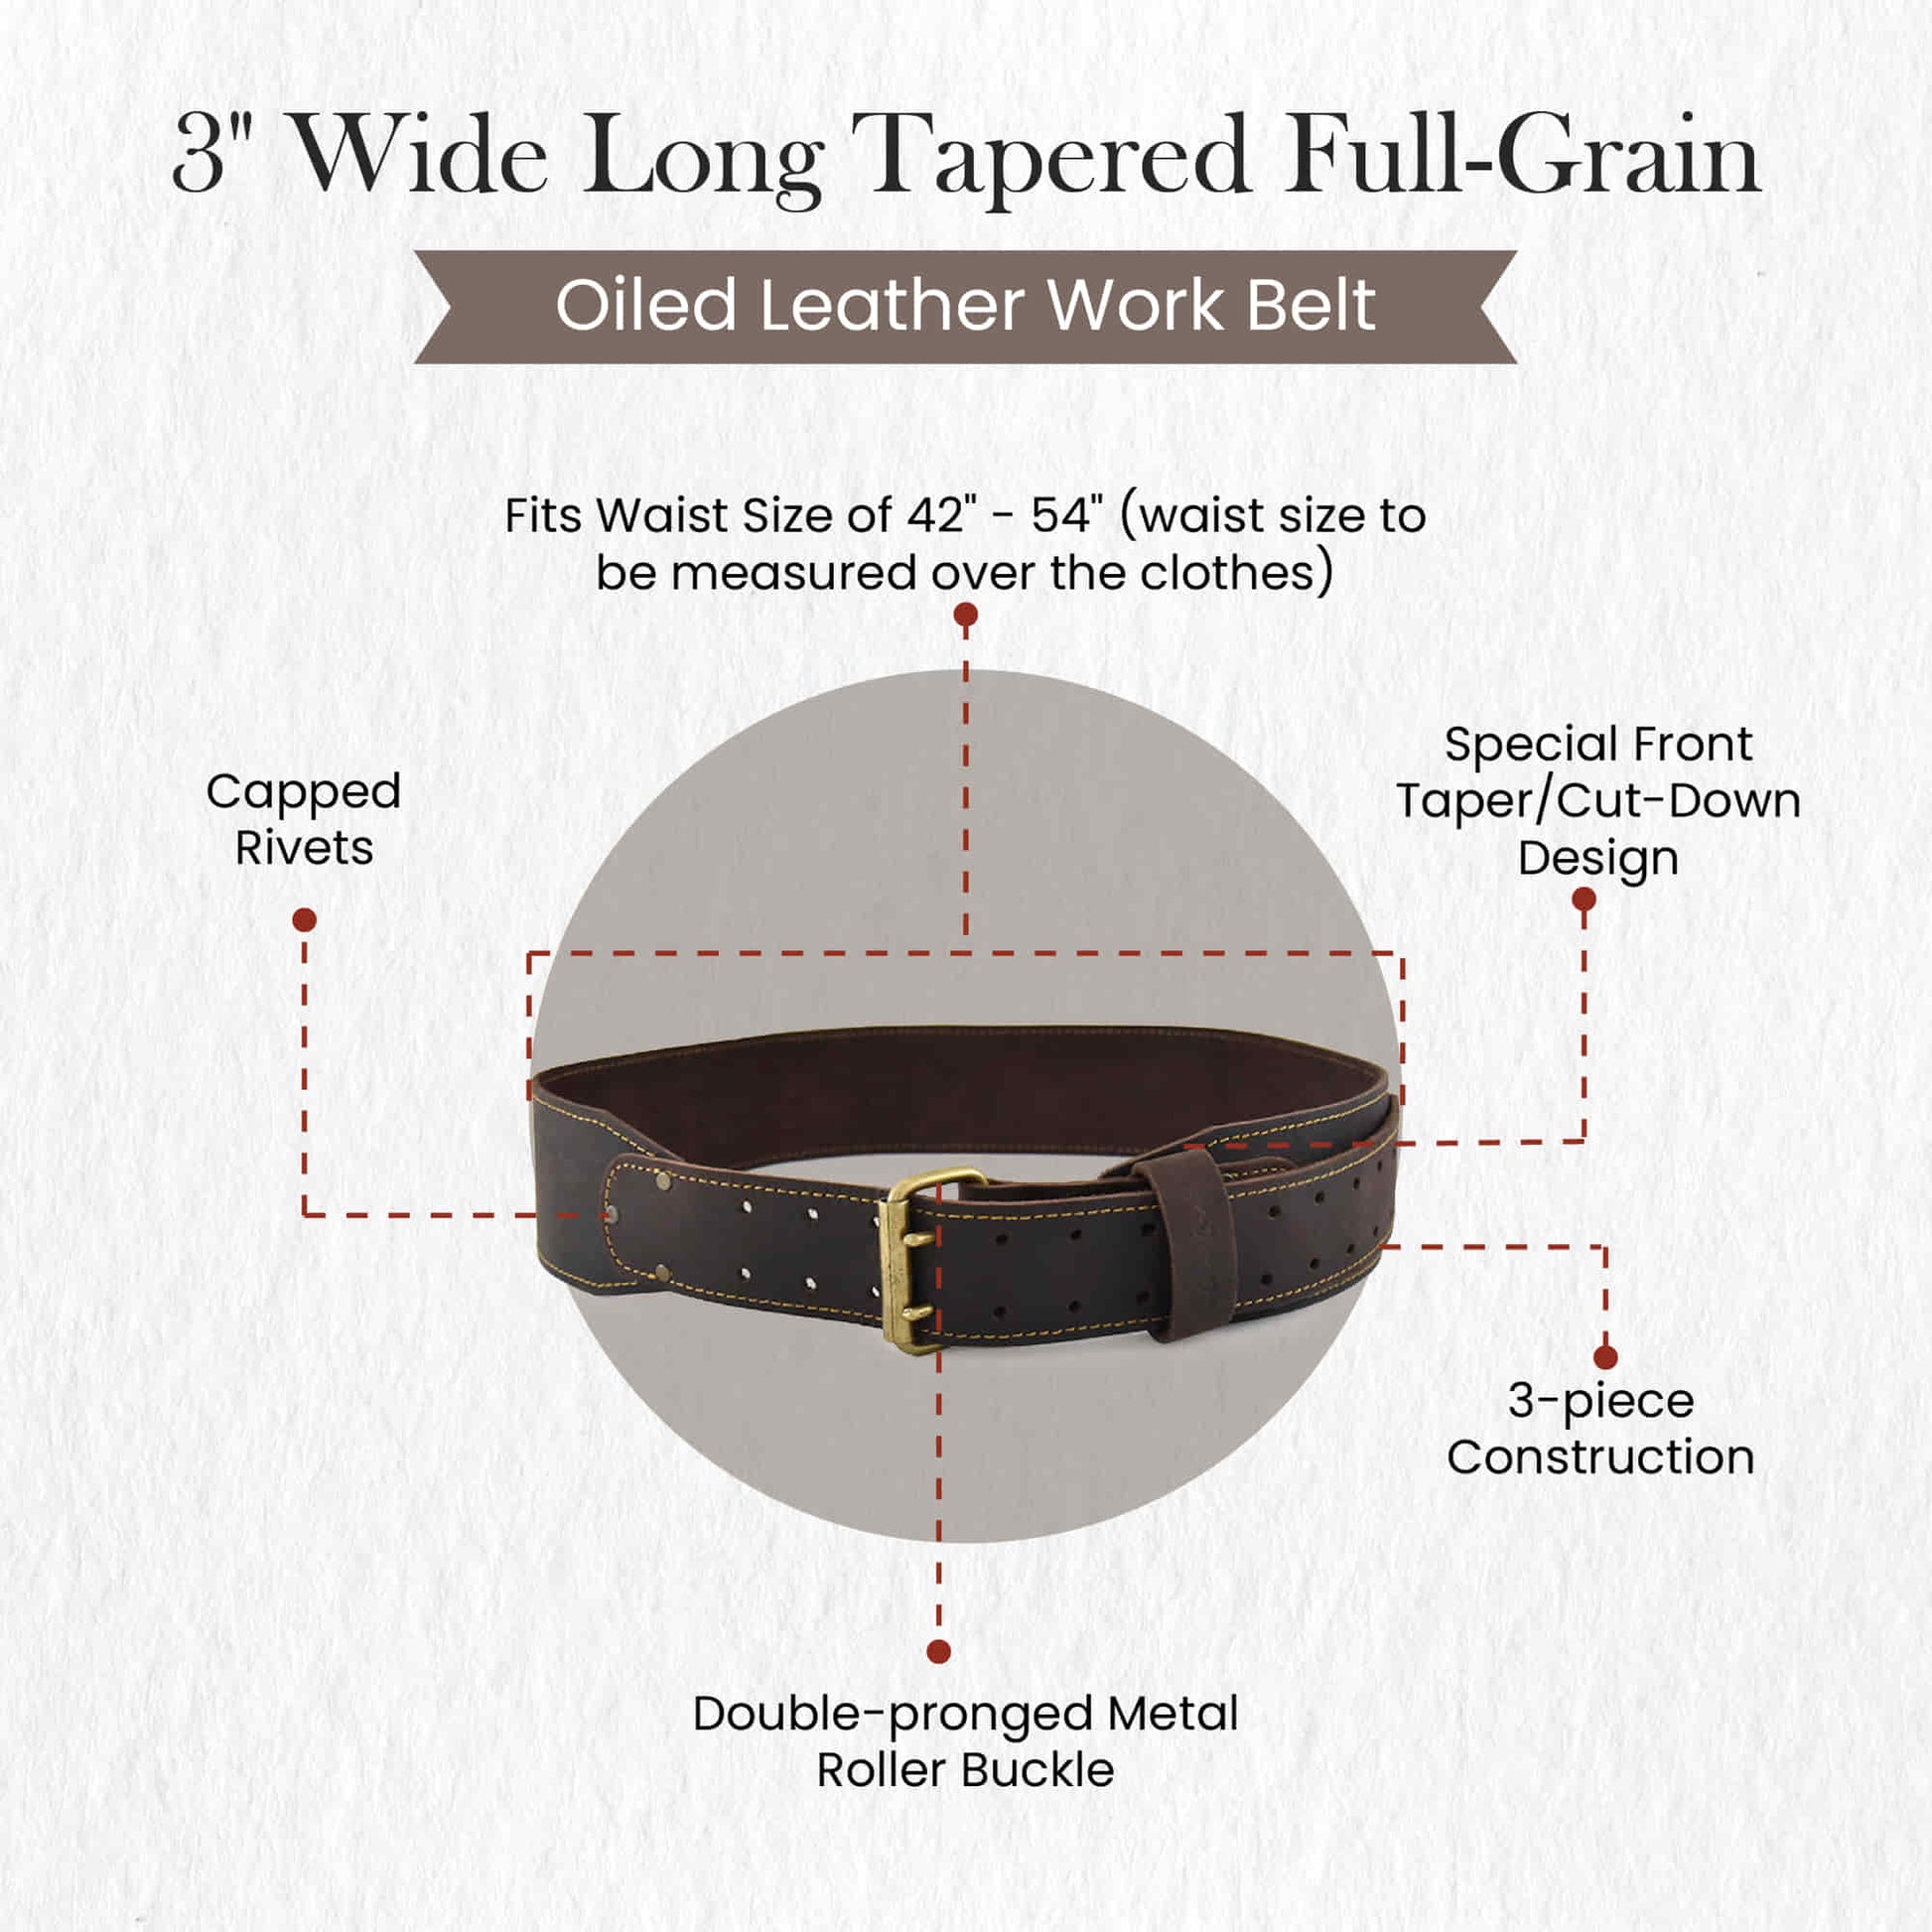 74055 -3 Inch Wide Long Tapered Leather Work Belt in Oiled Leather in Dark Brown Color - Front View Showing Details